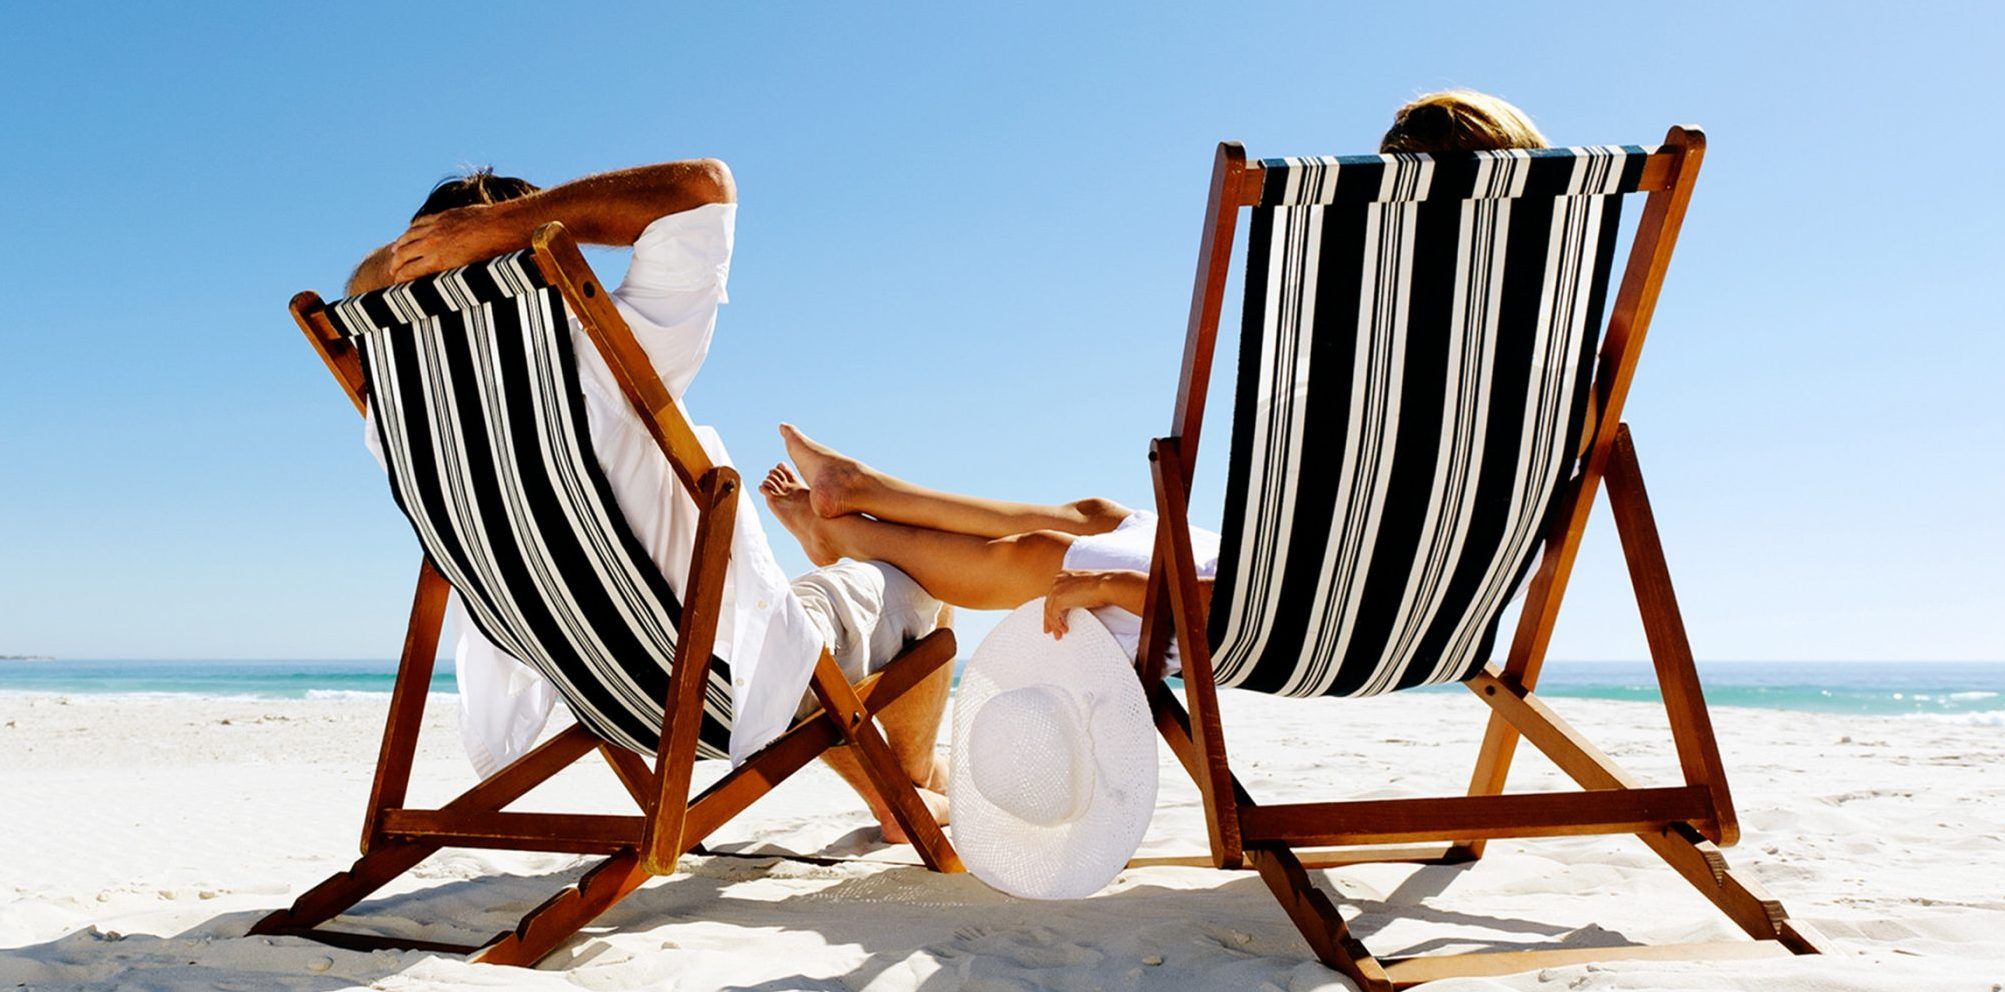 How to Care for Your Beach Chairs | ReviewThis